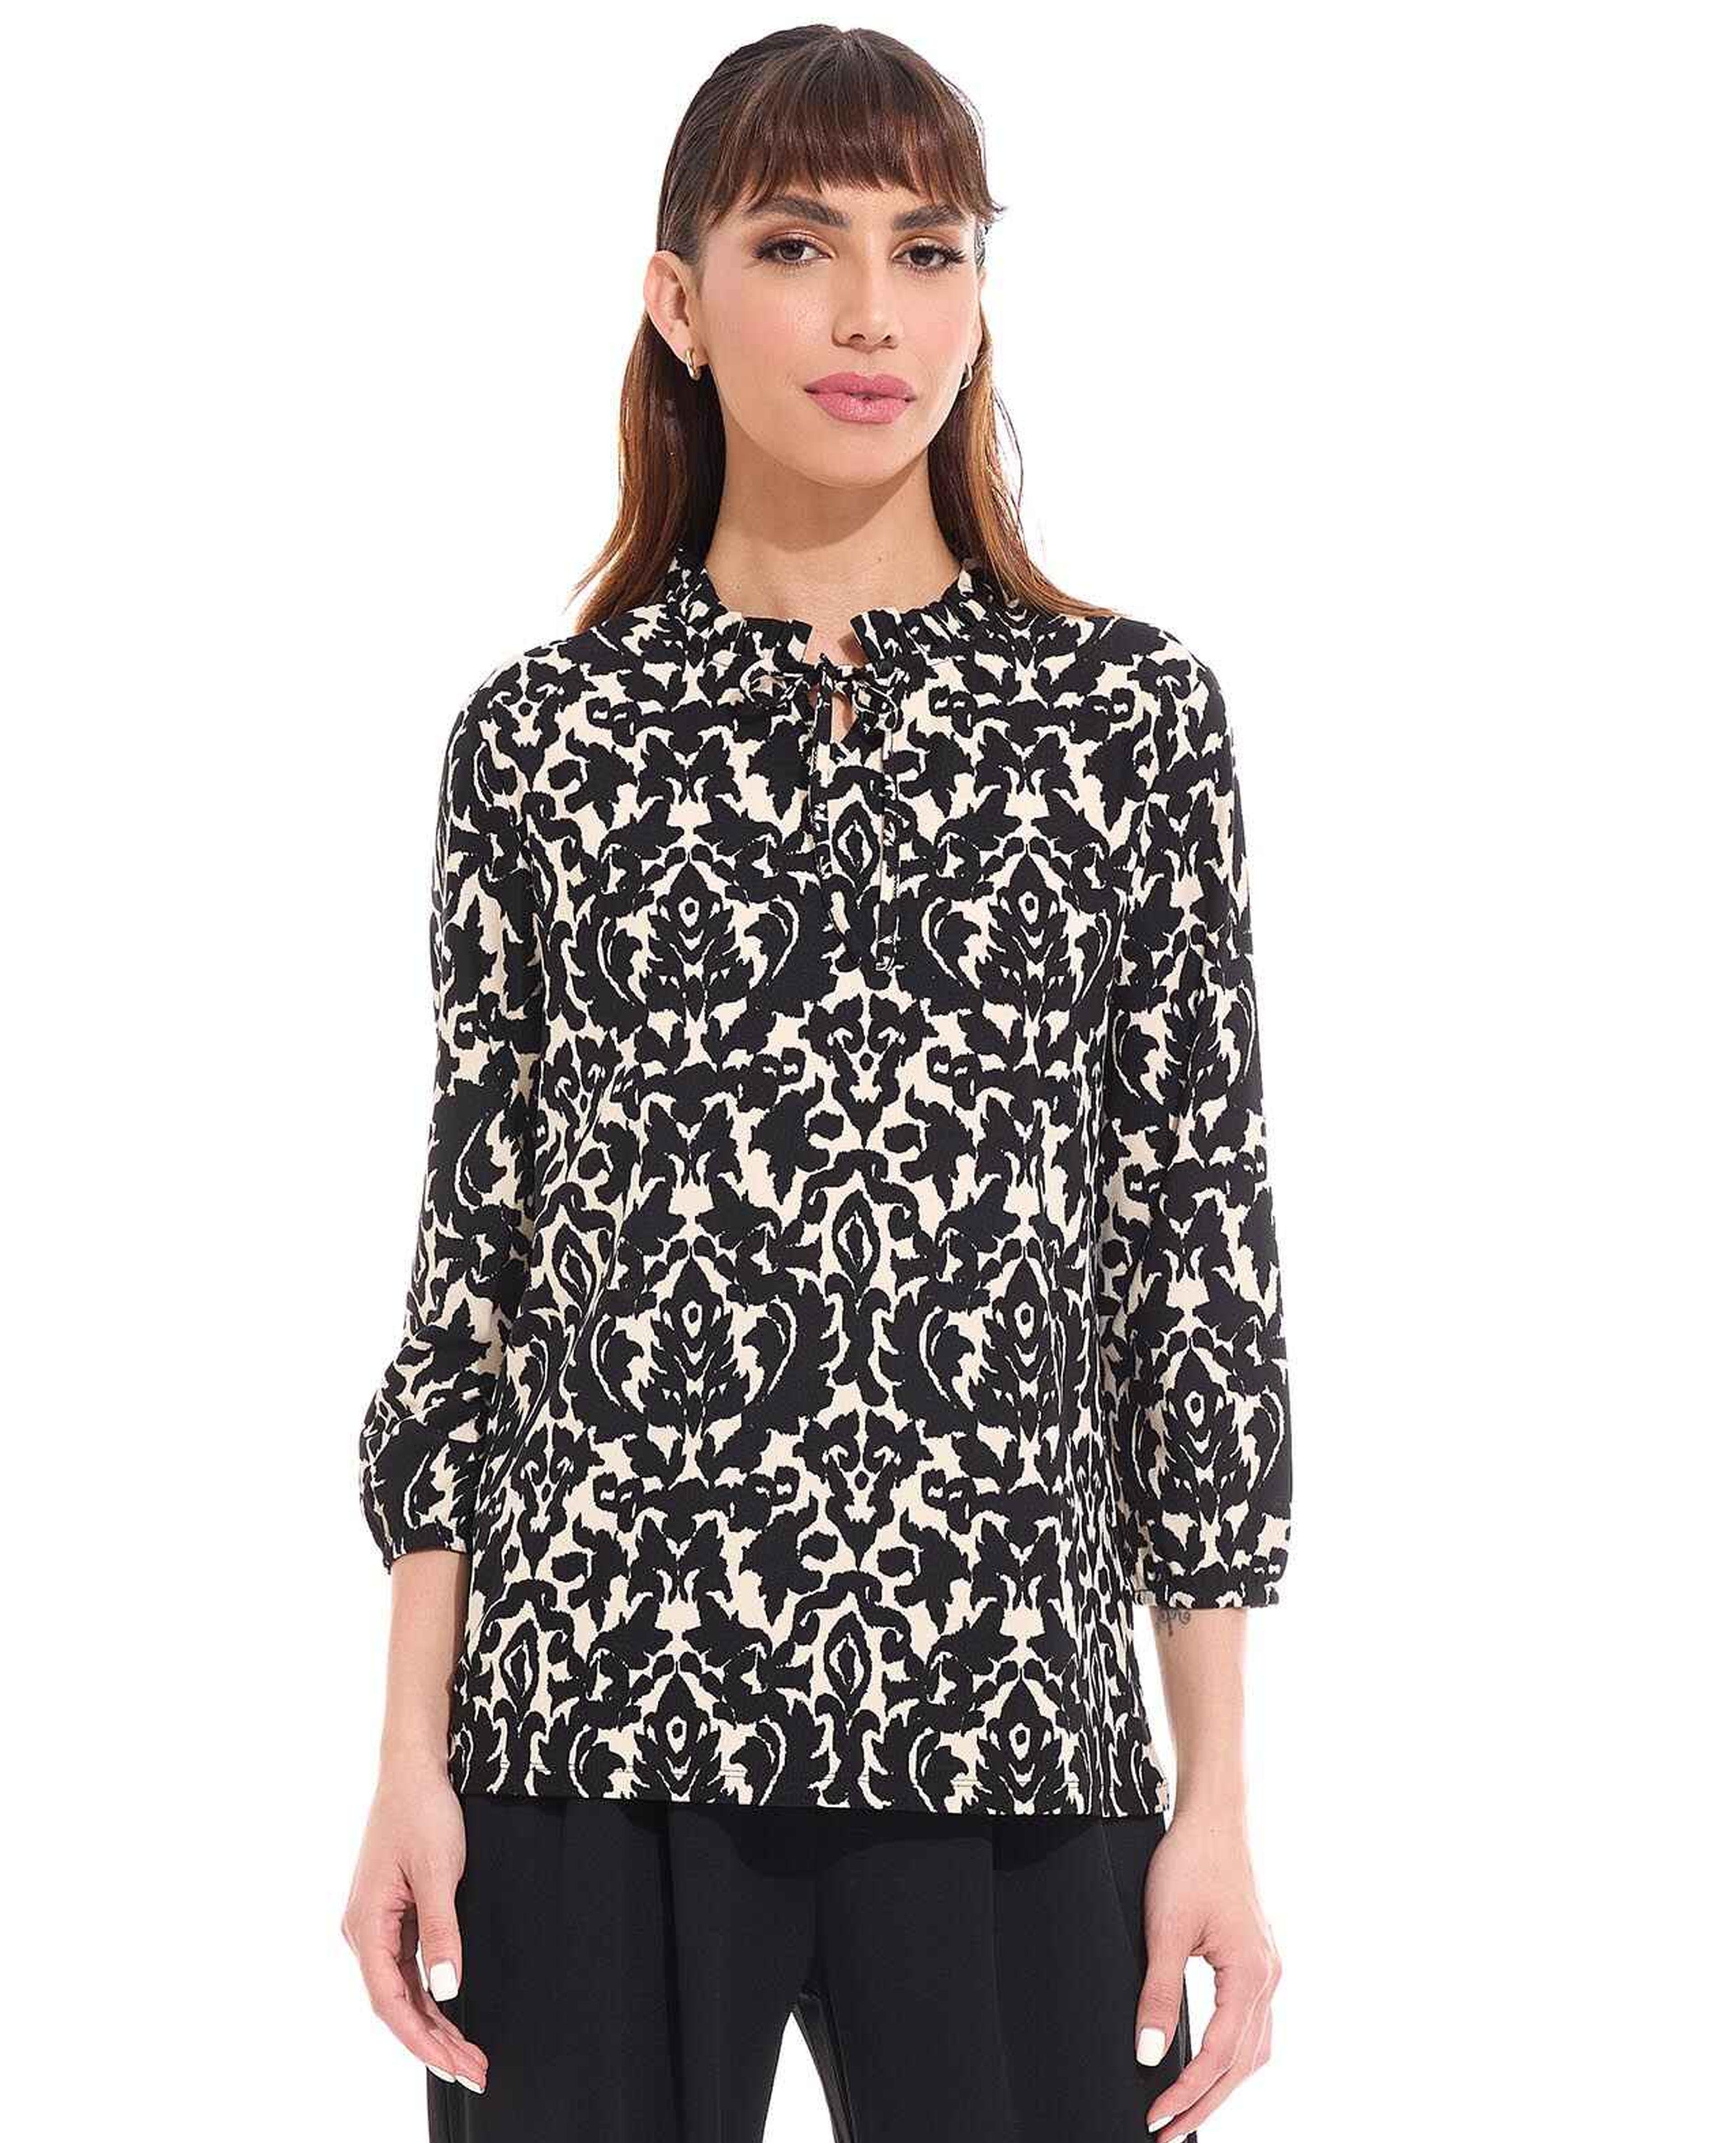 Patterned Top with Tie-Up Neck and 3/4 Sleeves